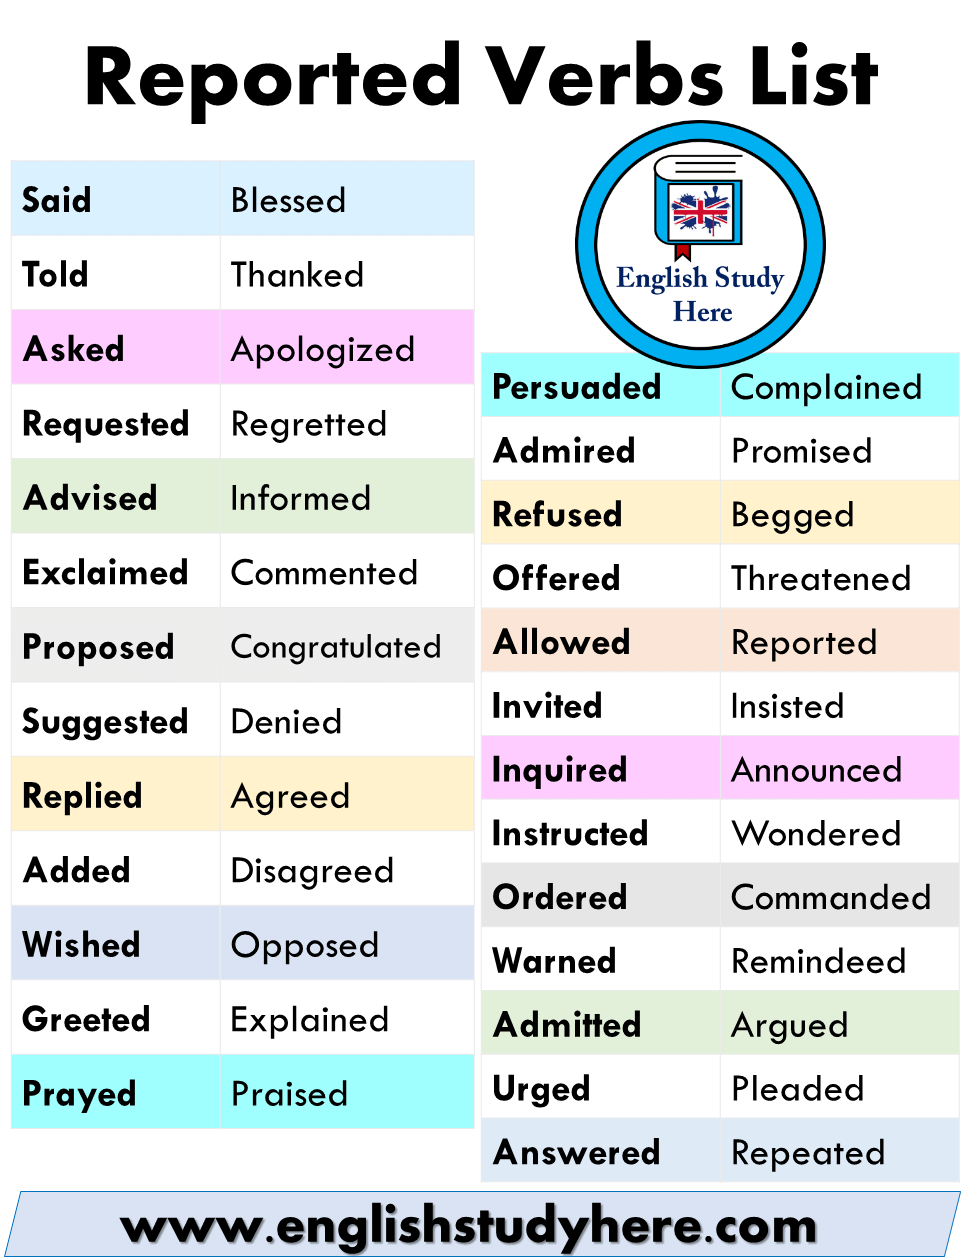 verbs used to reported speech